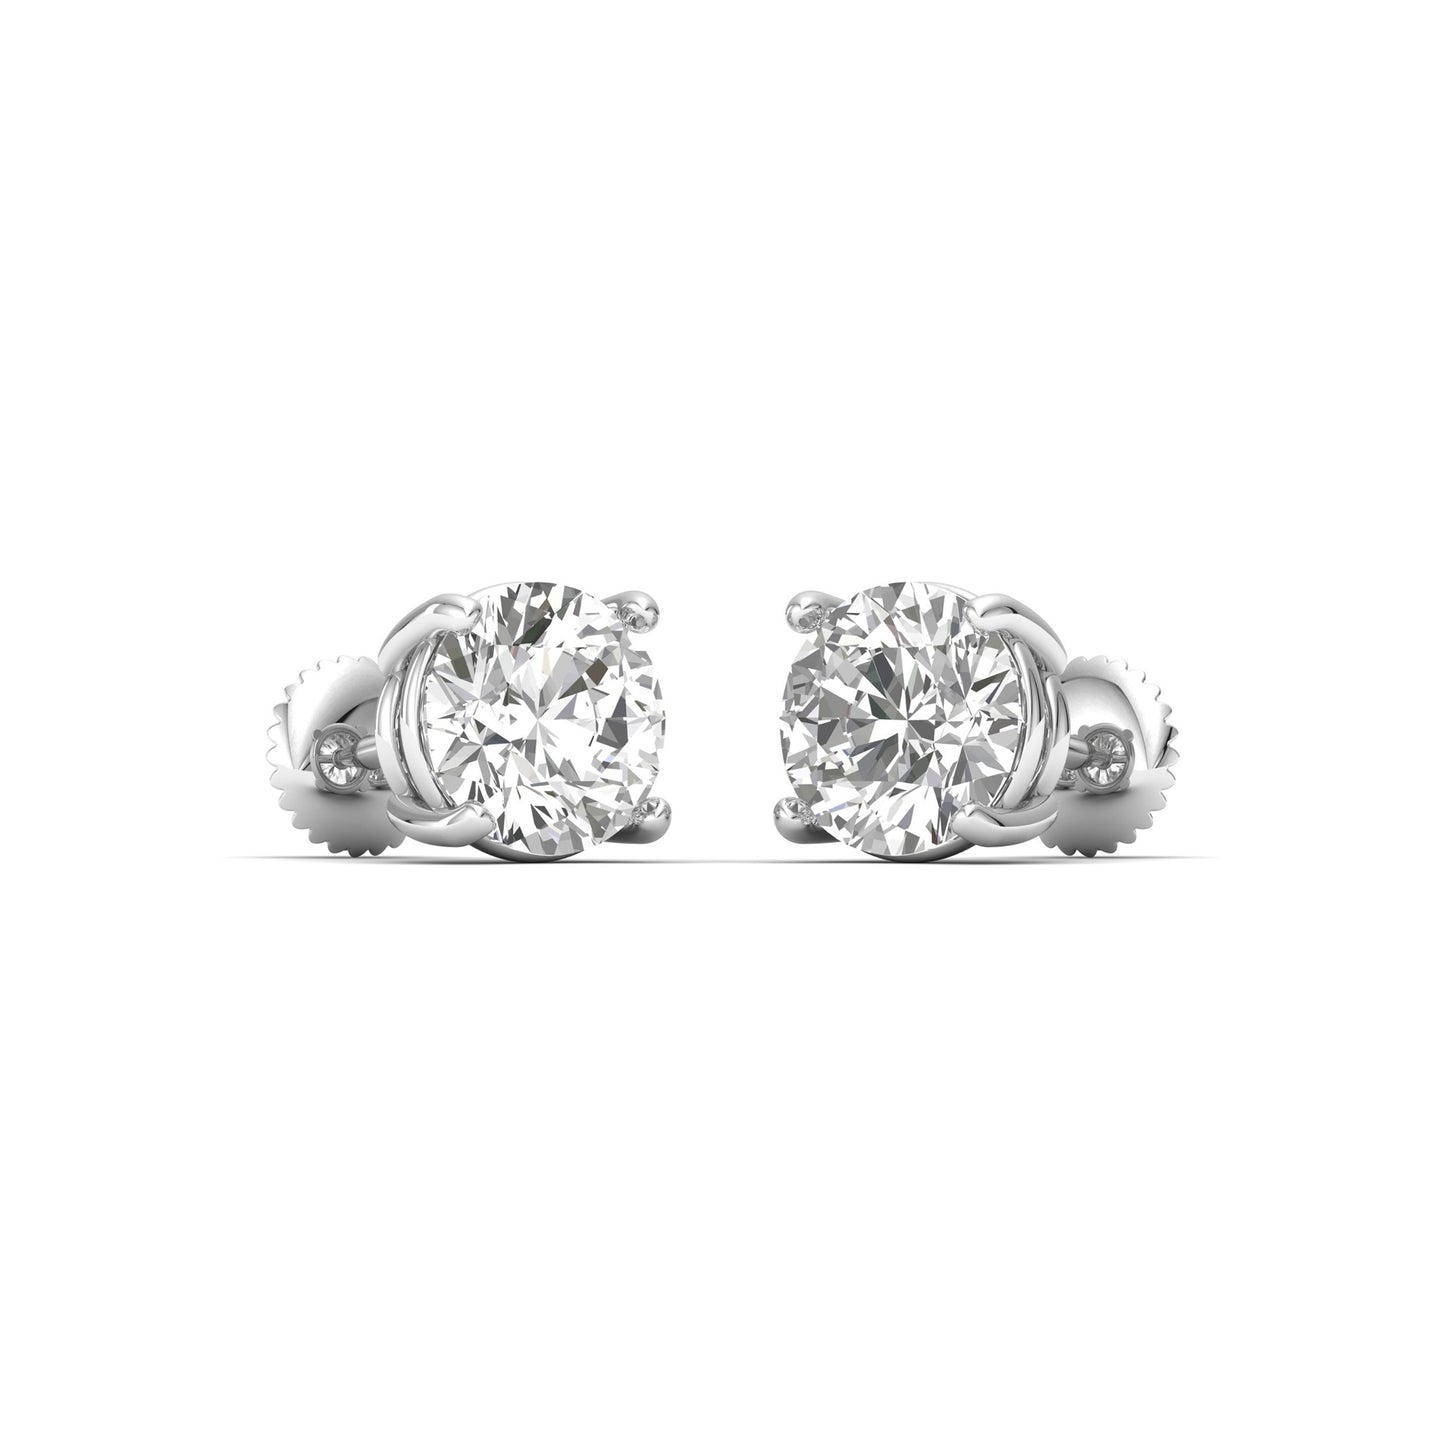 Timeless Brilliance: Captivating Round-Cut Diamond Earrings for Unmatched Elegance